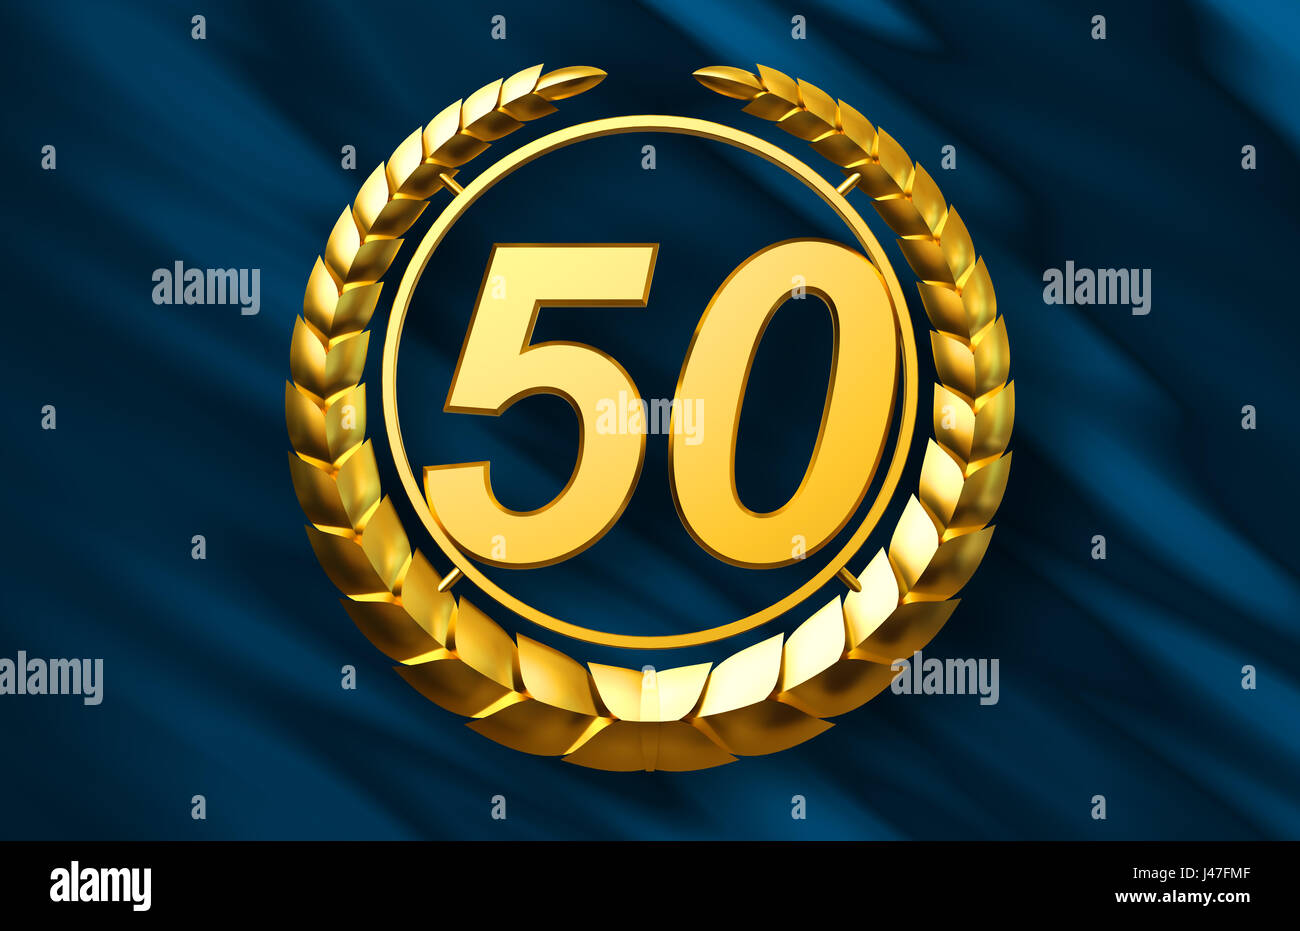 Anniversary Golden Laurel Wreath On Background Of The Blue Flag Stock Photo